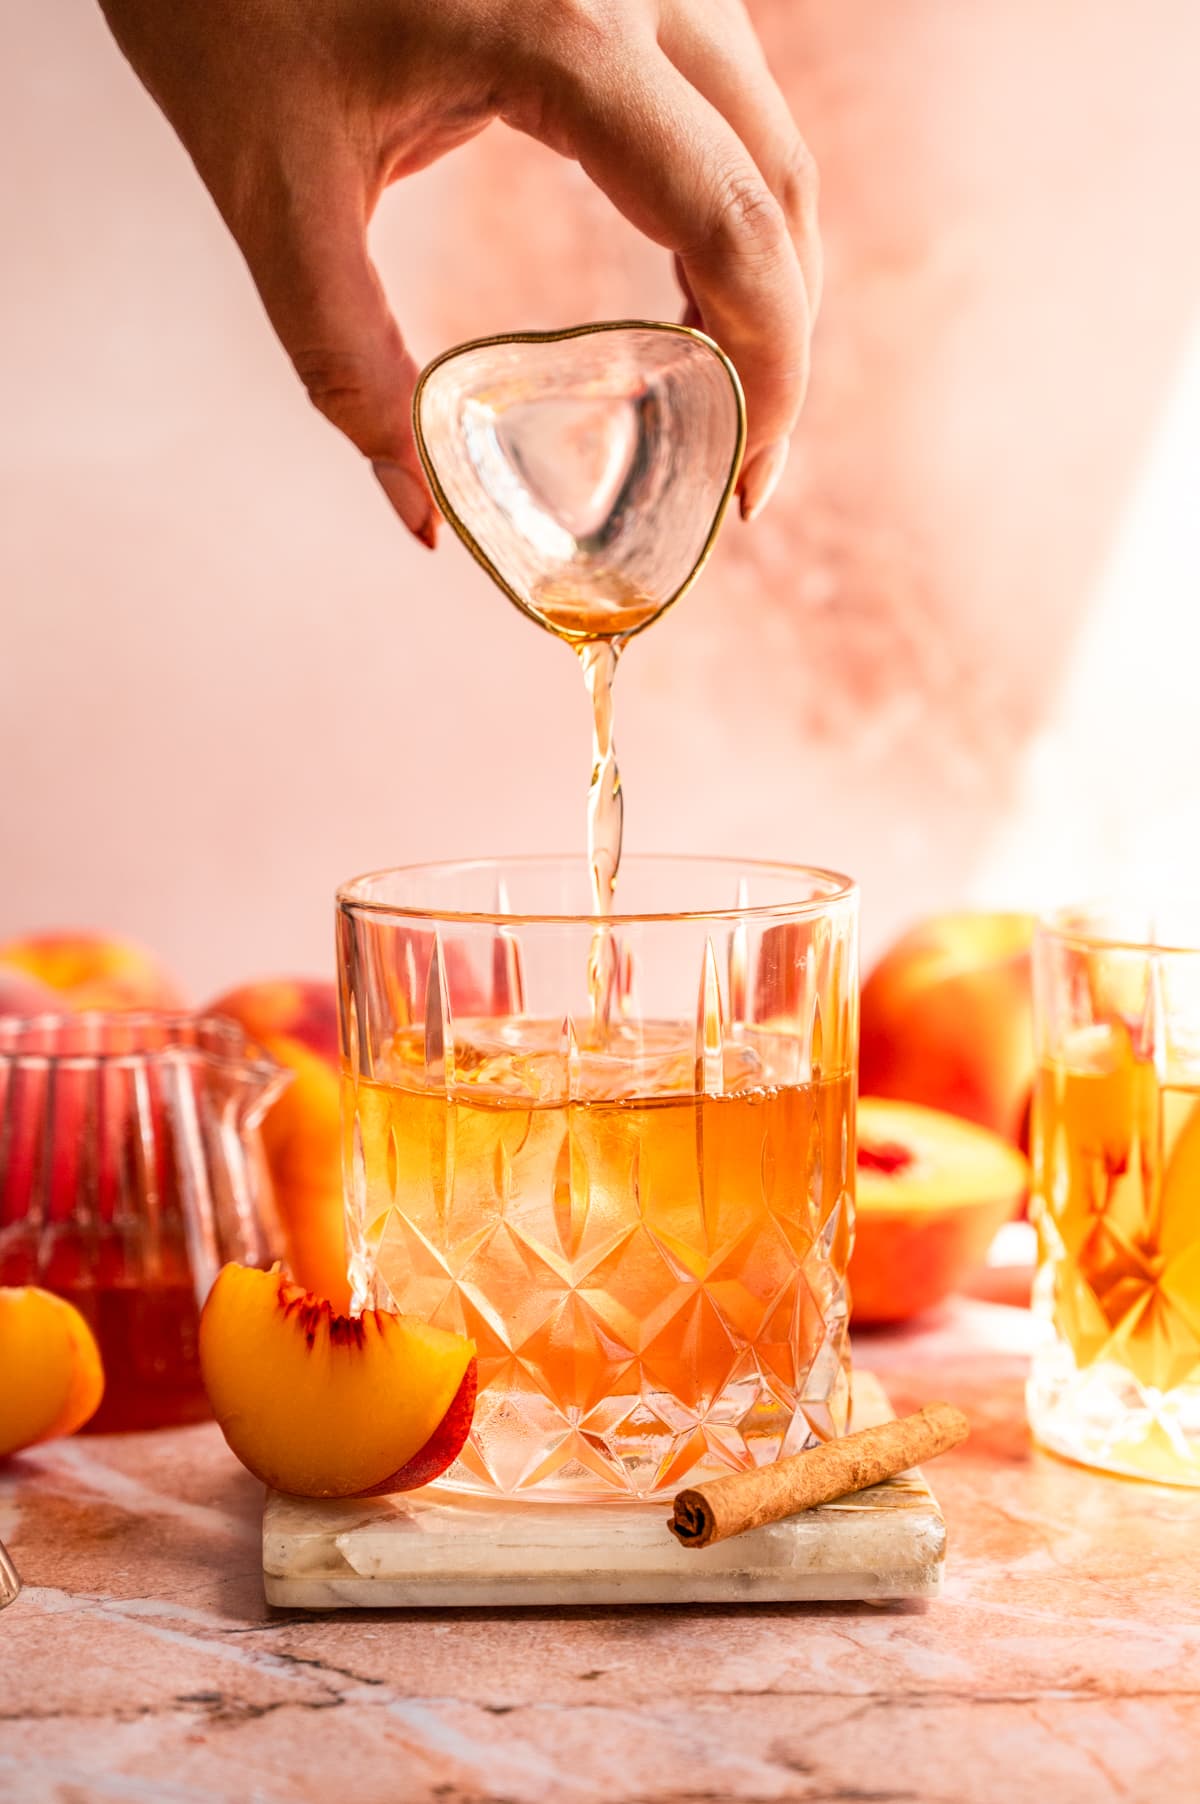 The bourbon being poured into the old fashioned glass with sliced peaches off to the side.